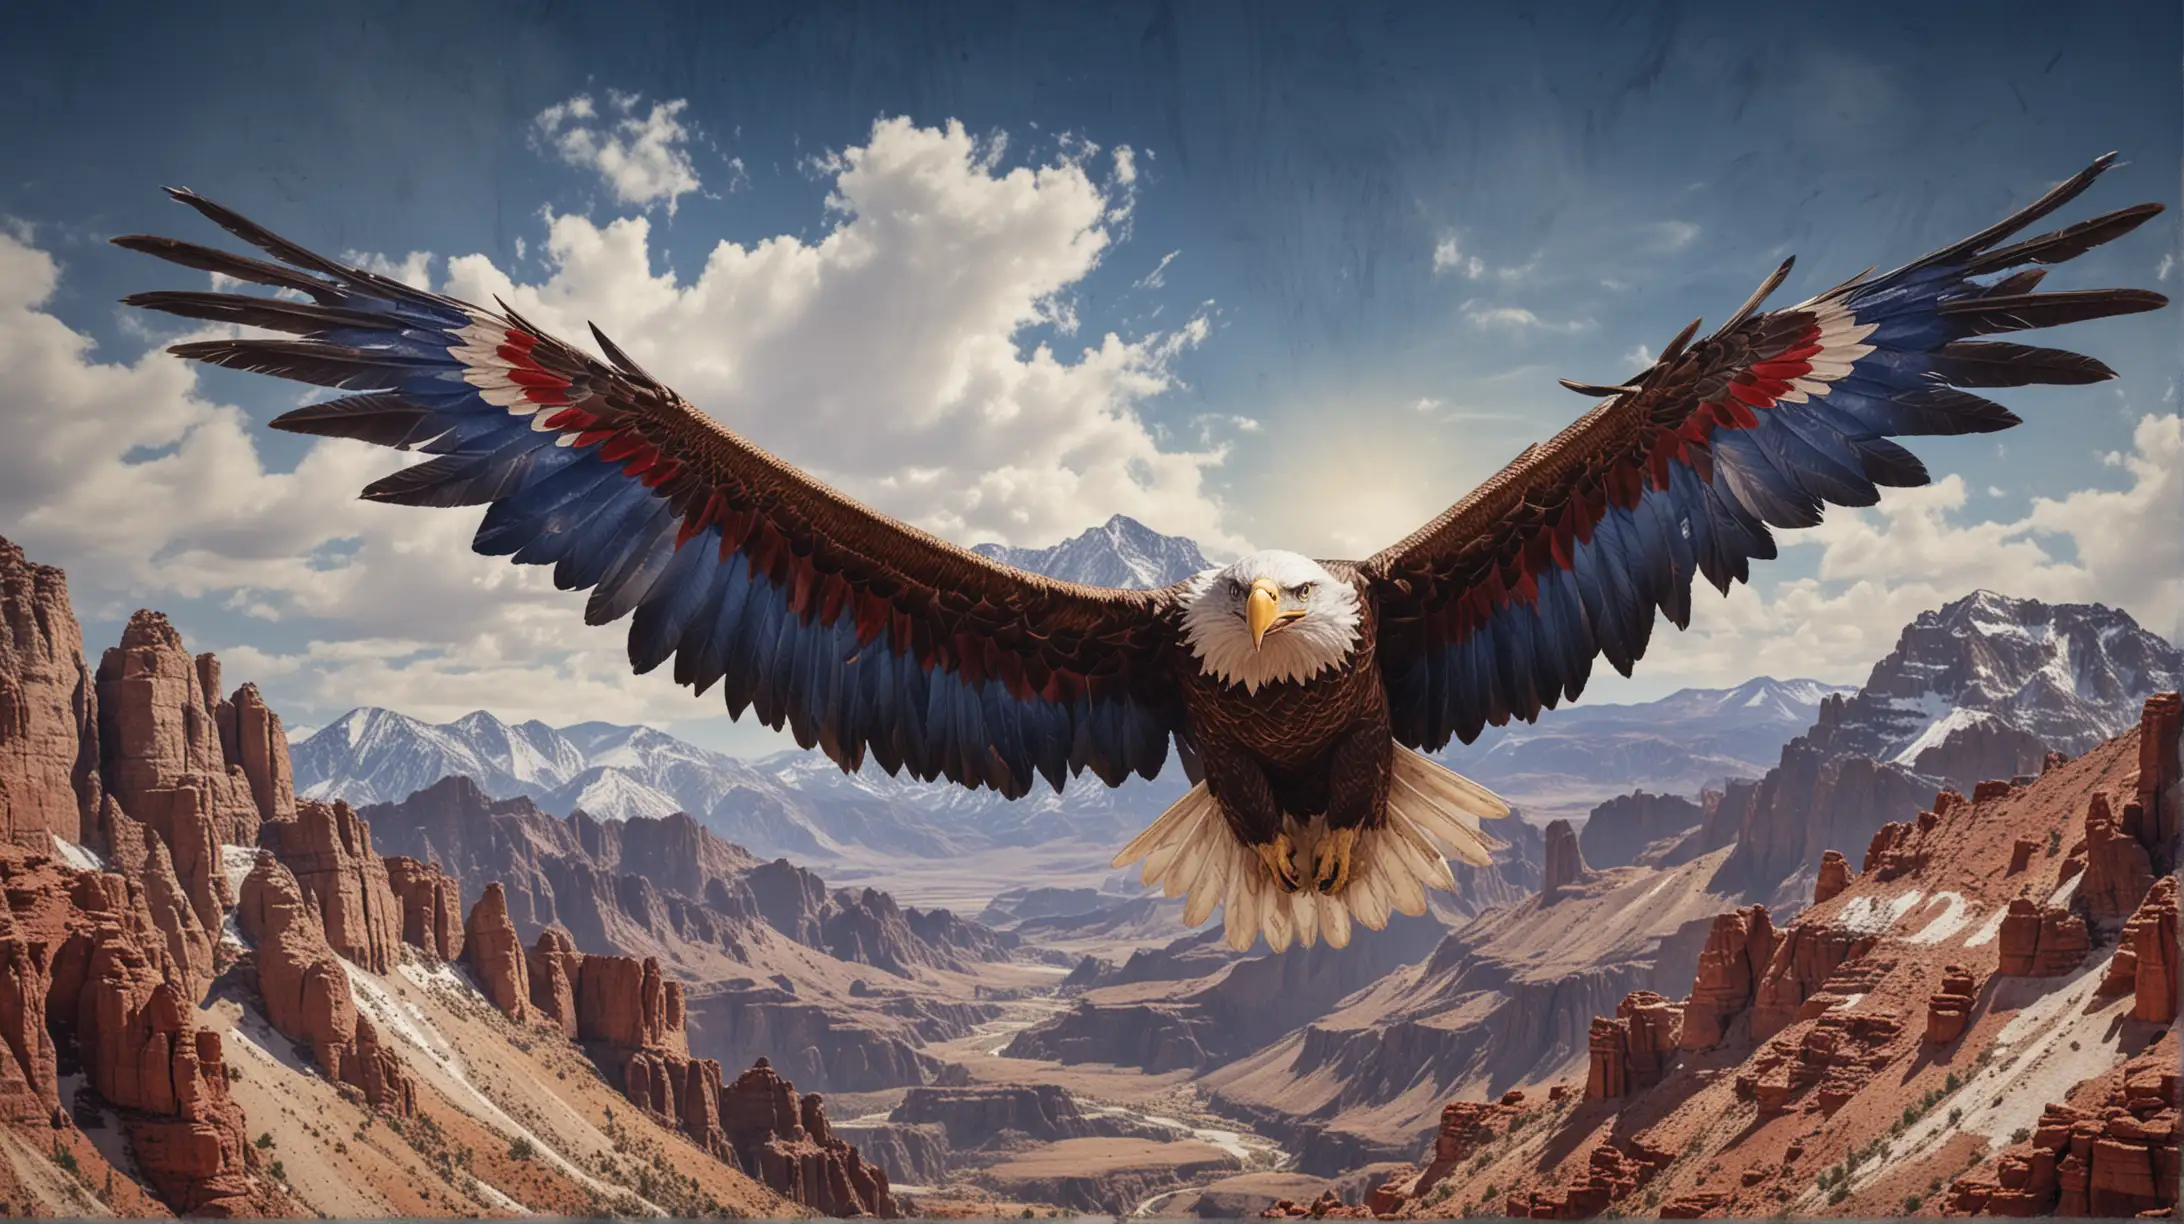 Majestic Eagle with Spread Wings against Utah Mountain Landscape